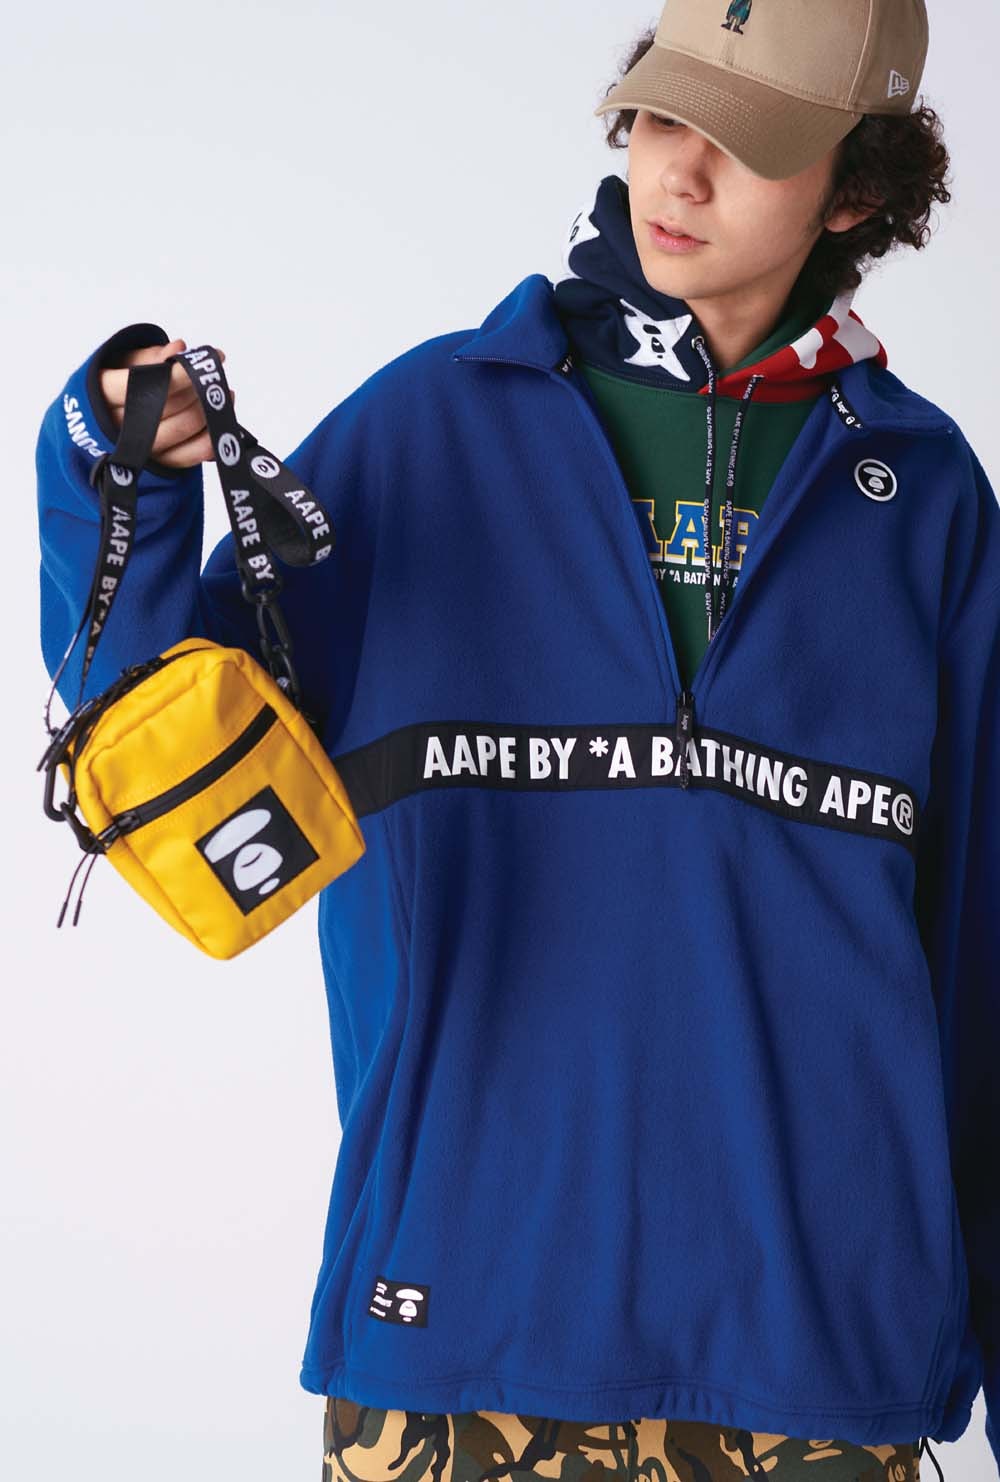 AAPE Winter 2019 Lookbook Jackets Hoodies Crewneck Sweatshirts Long sleeves Vests Pants Waist Bags Pouches Beanies Hats Yellow Green Black Orange Red Camouflage Checkered